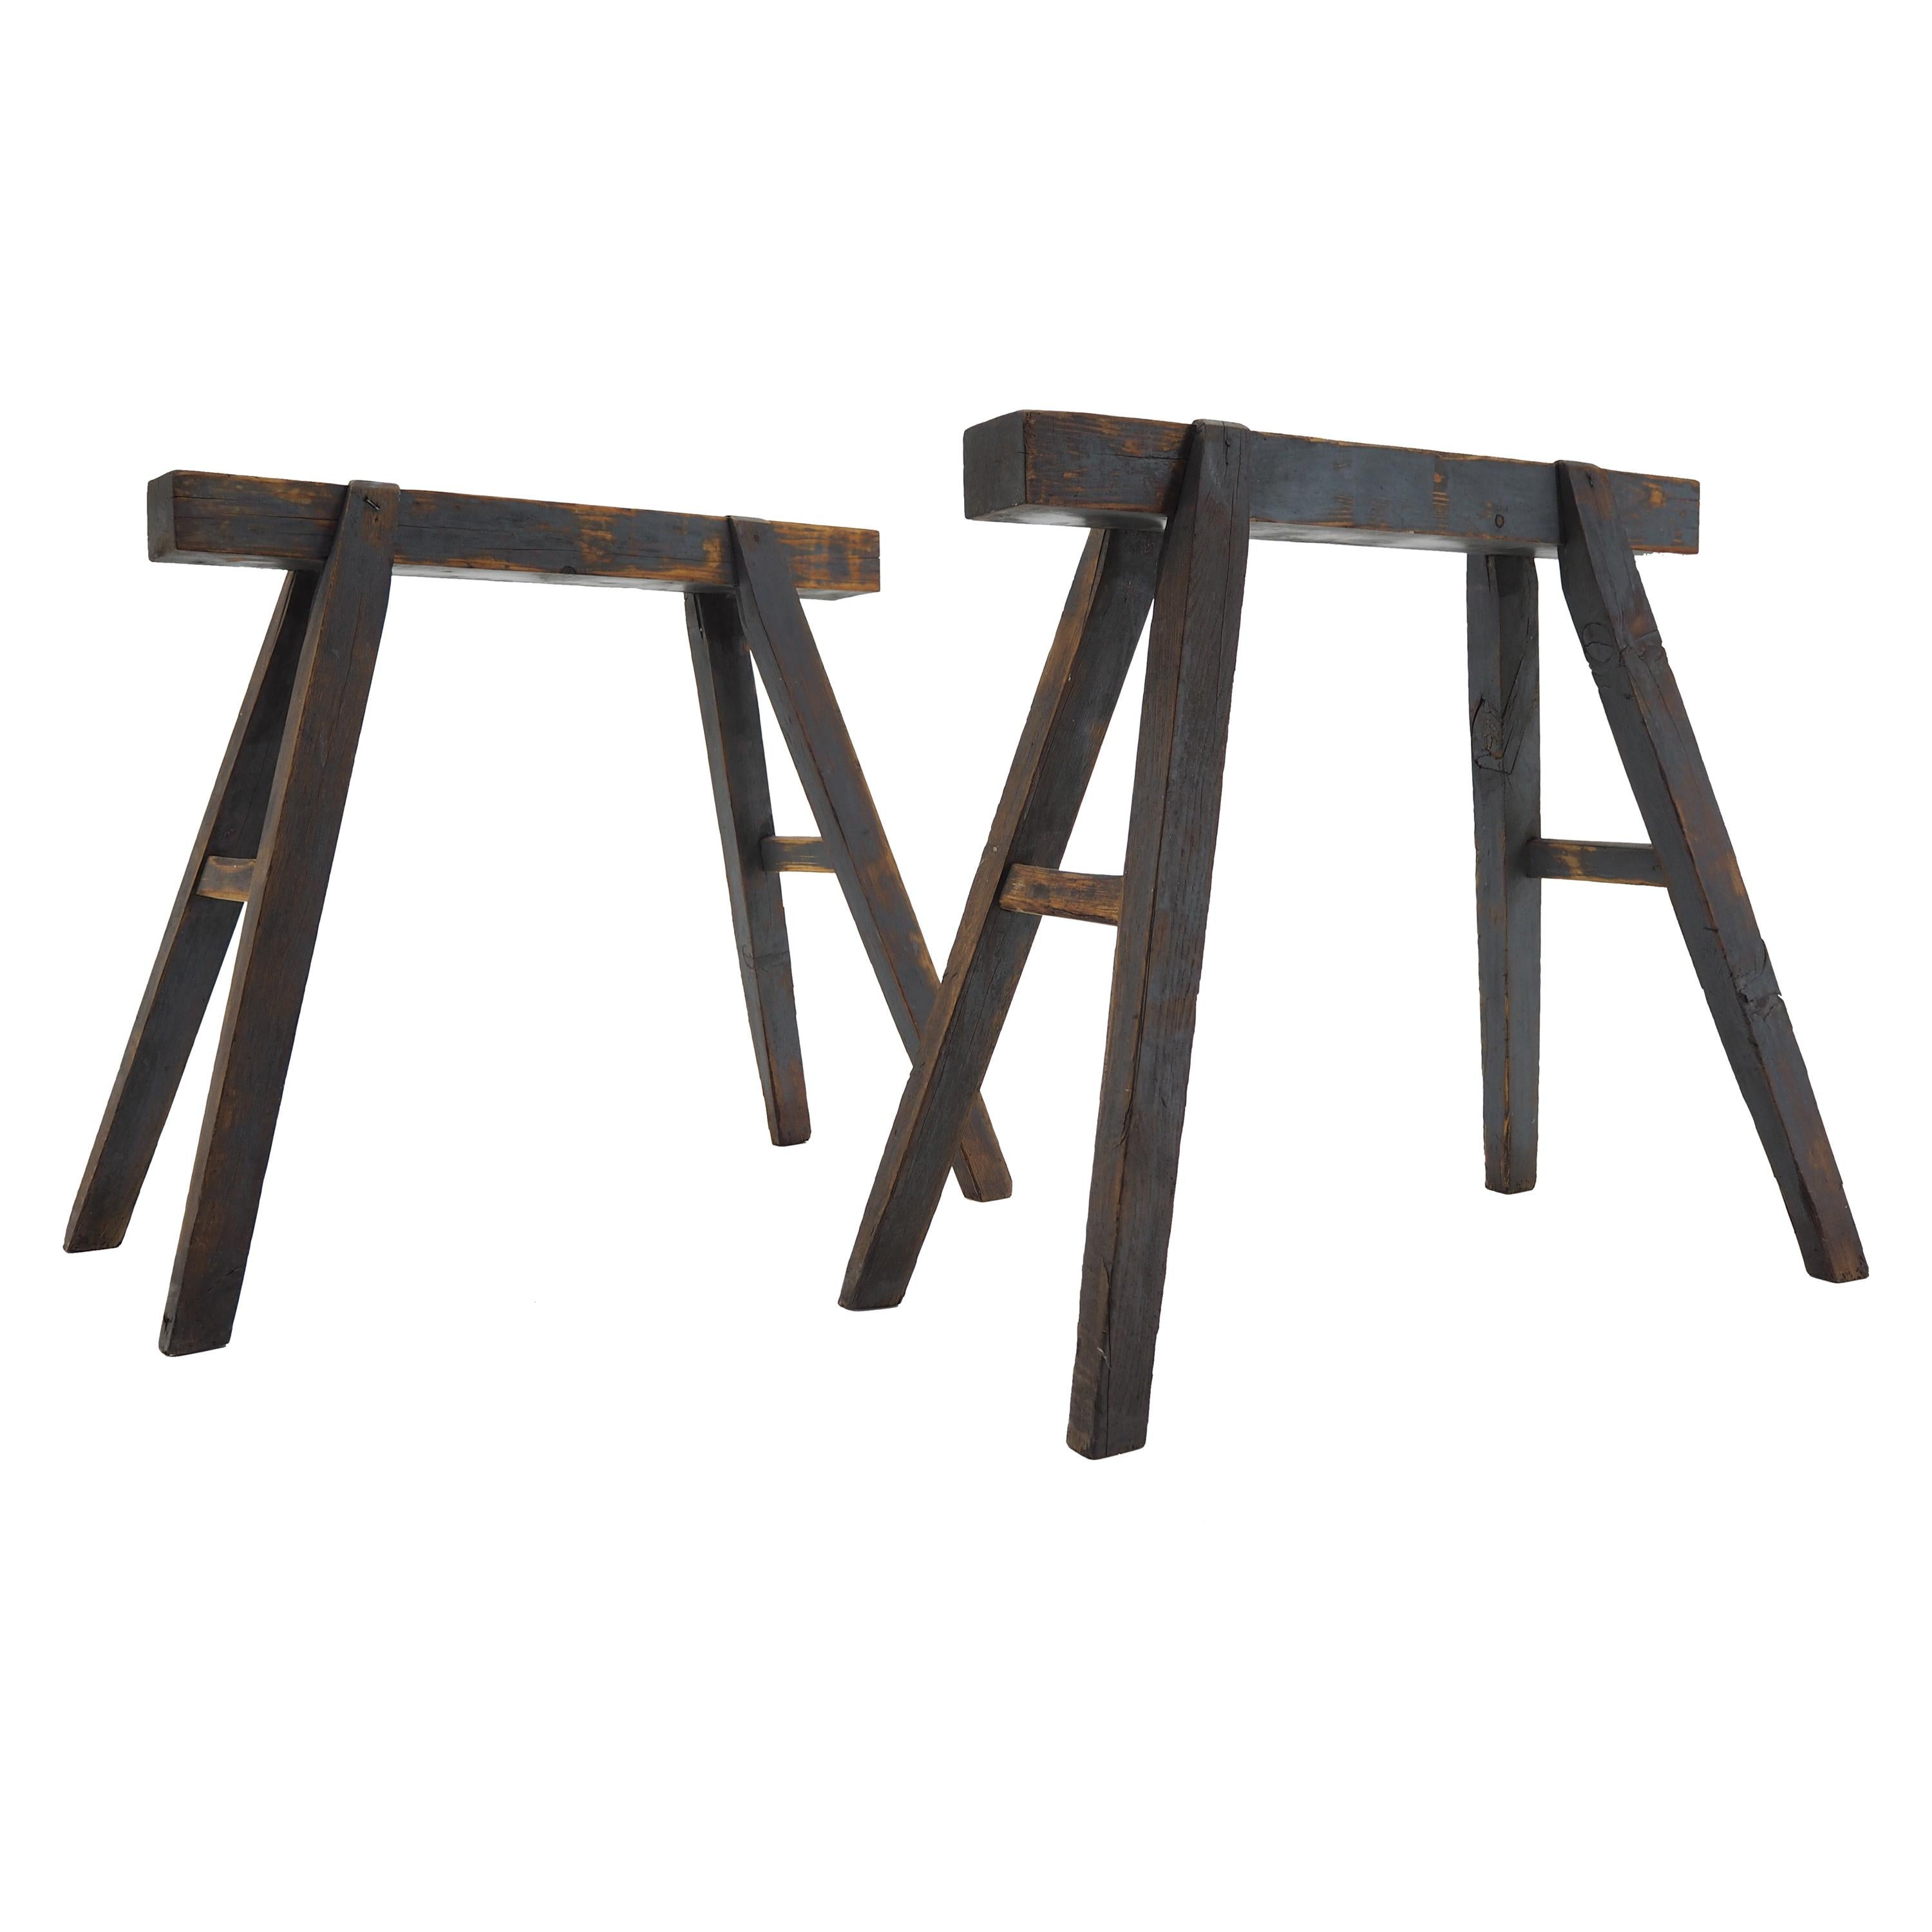 Pair of Industrial Trestle Table Bases, Early 20th Century